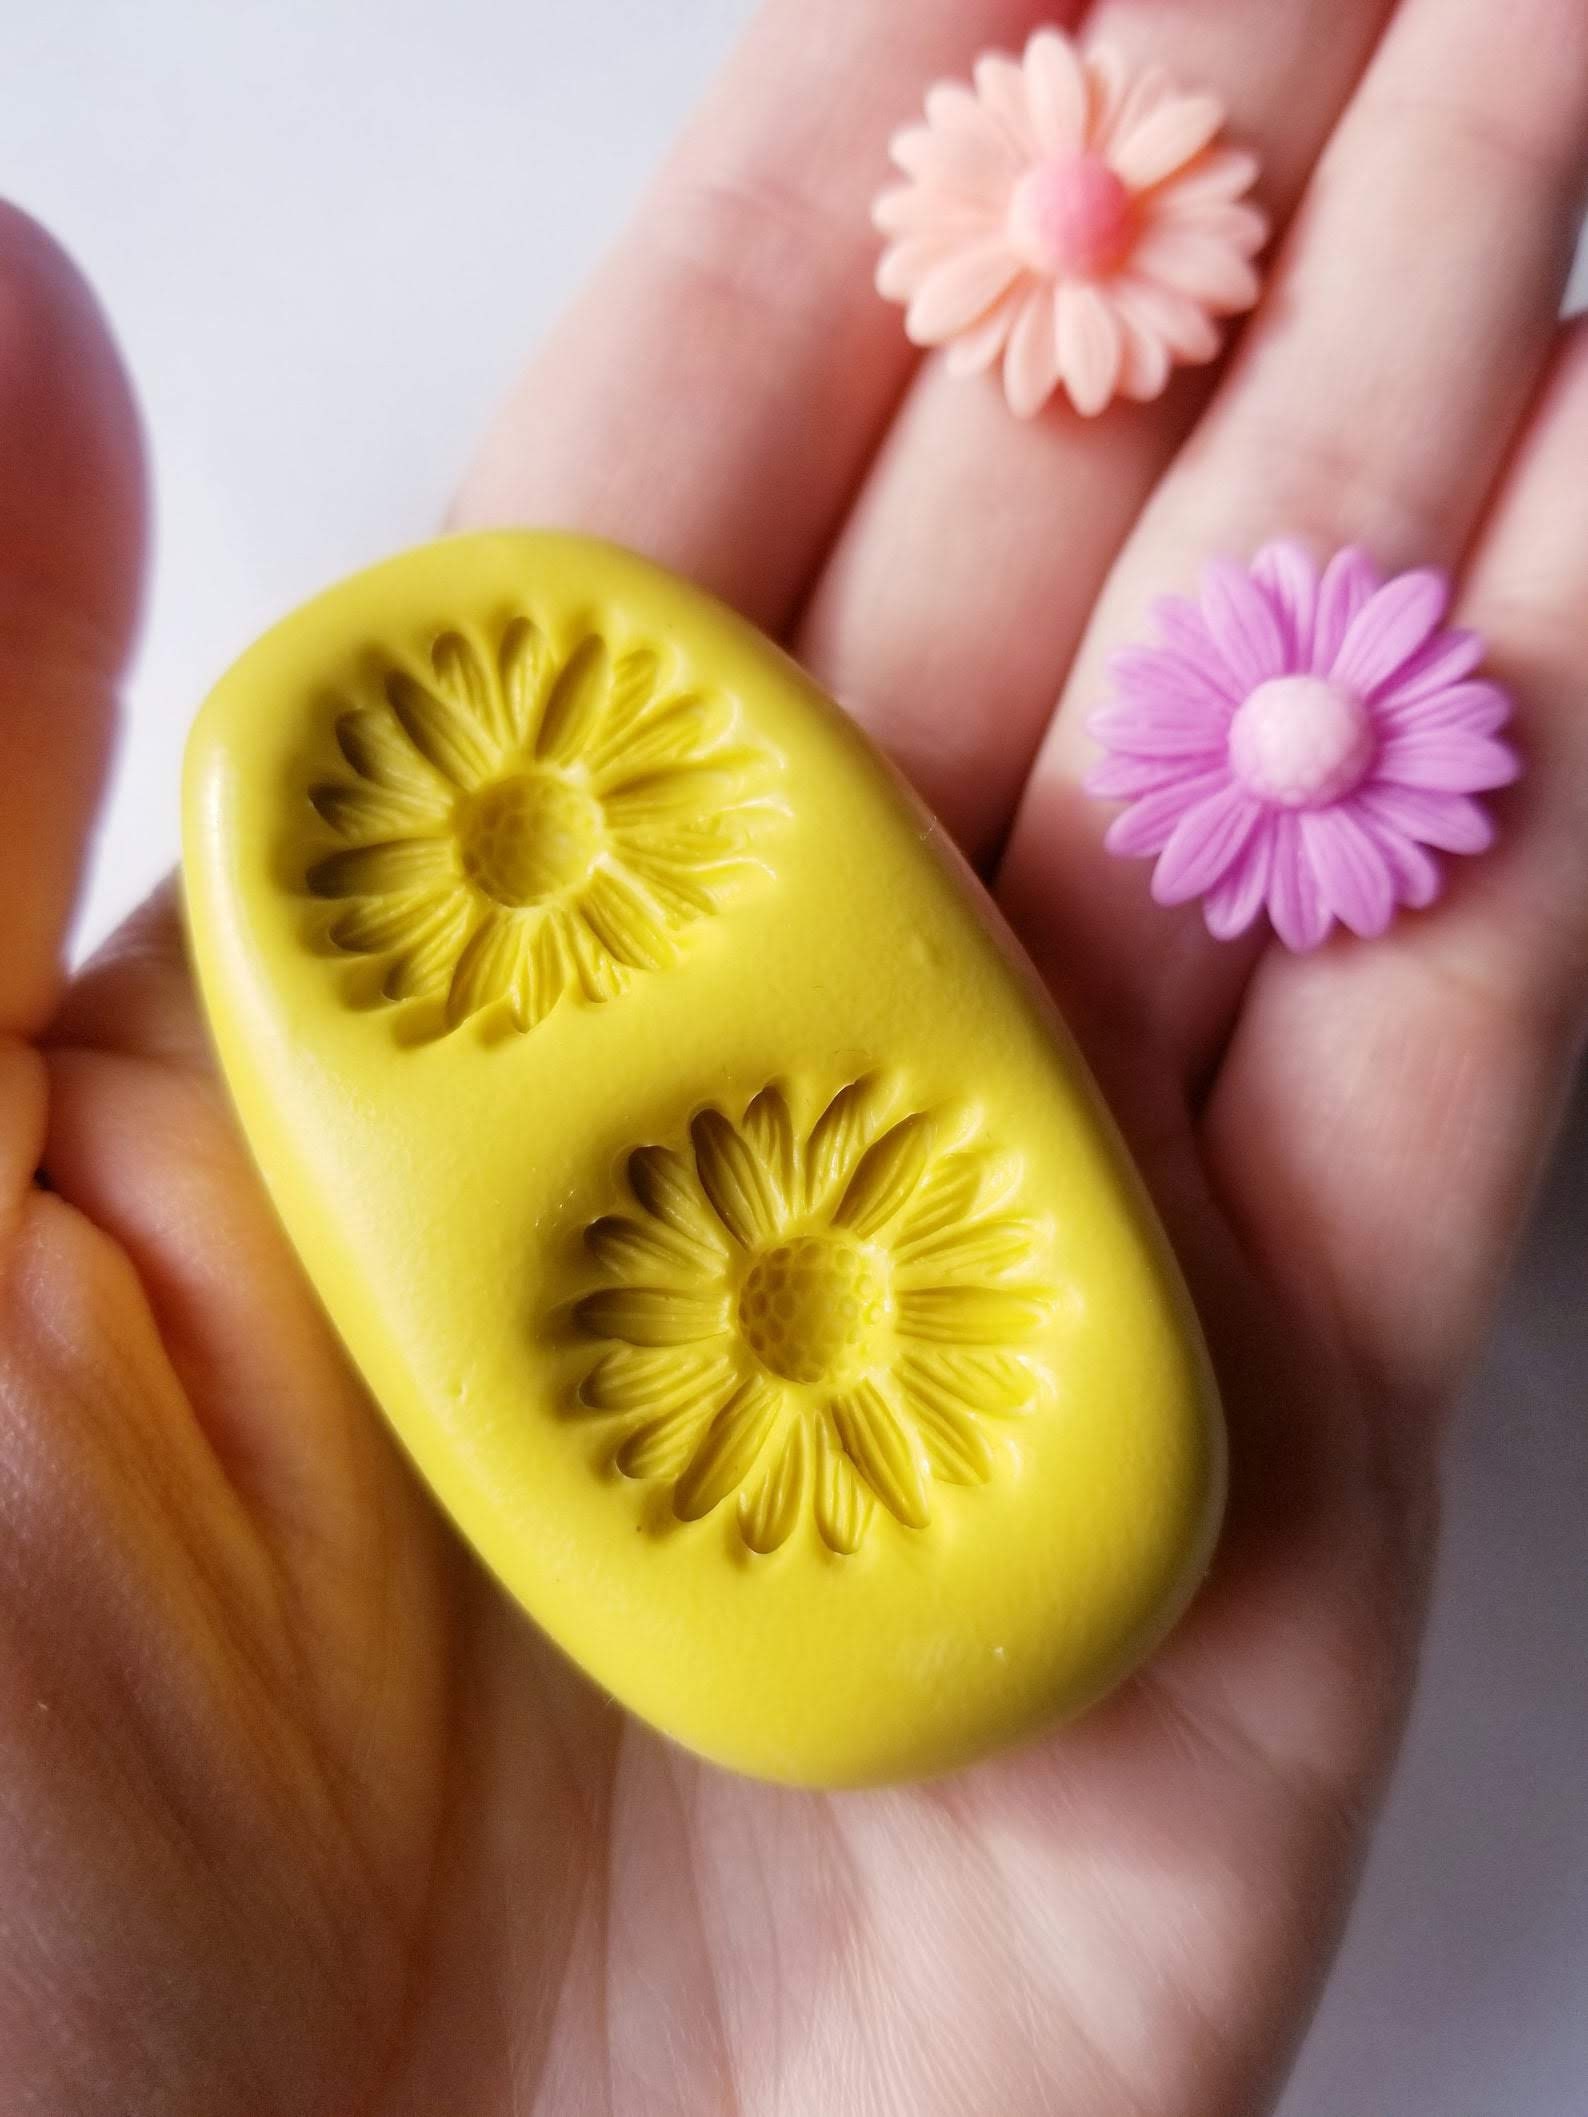 Different Flowers Silicone Mold Flower Center Mold for Chocolate Mini Flower  Mold for Fondant for Polymer Clay Resin 